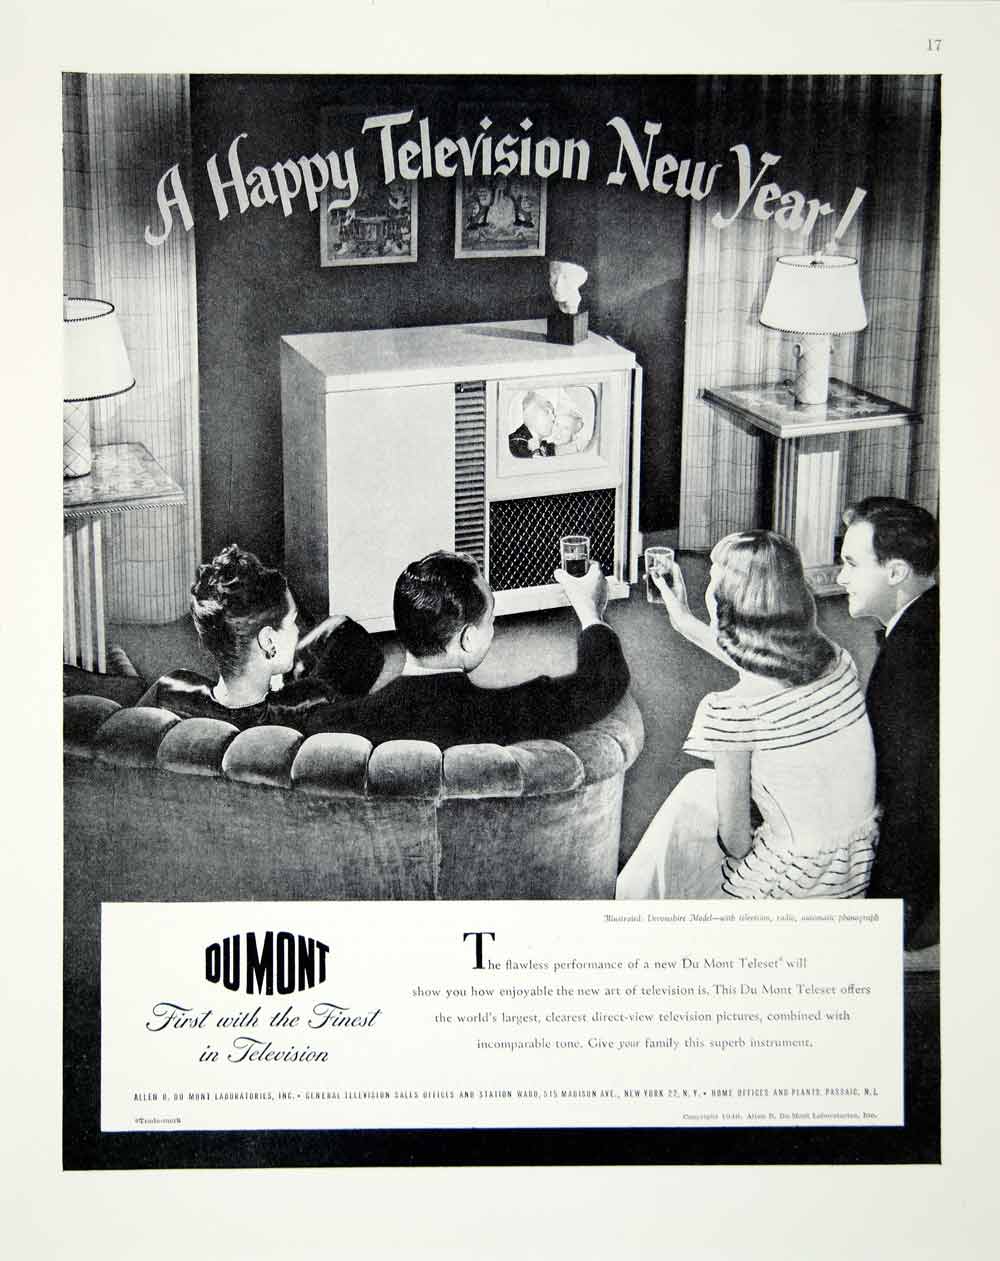 1947 Ad New Year Television Du Mont Teleset Allen Dinner Party 515 Madison FTM